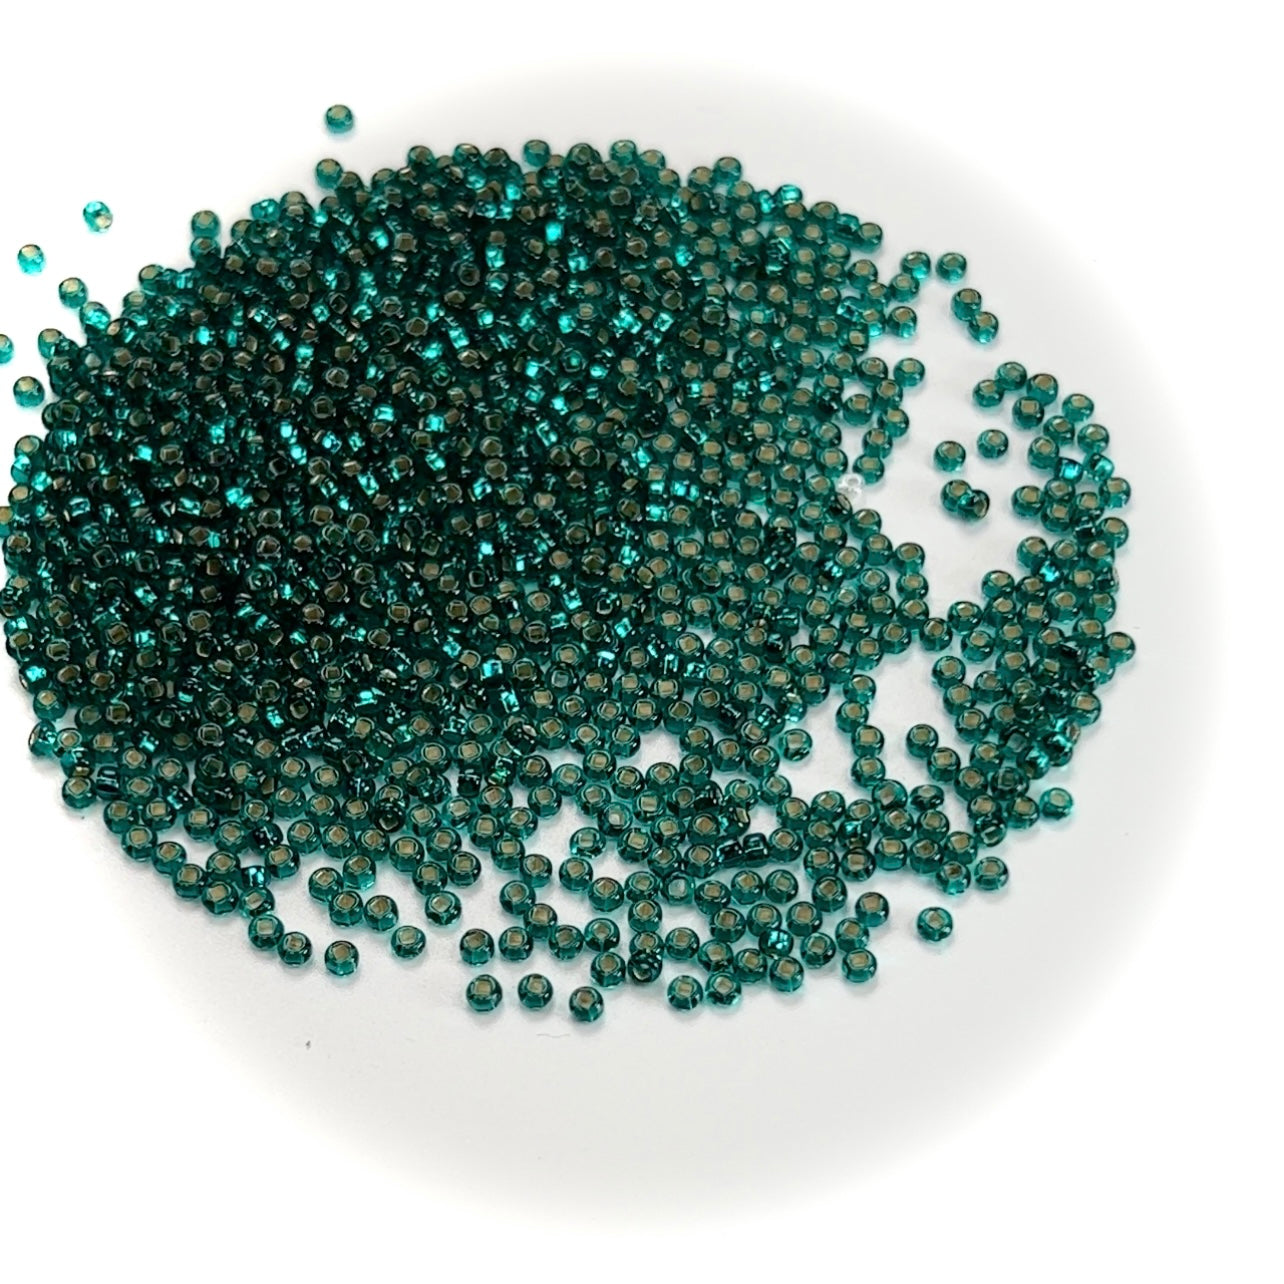 Rocailles size 10/0 2.3mm Blue Zircon Silver Lined Square Hole, Preciosa Ornela Traditional Czech Glass Seed Beads, 30grams (1 oz), P988